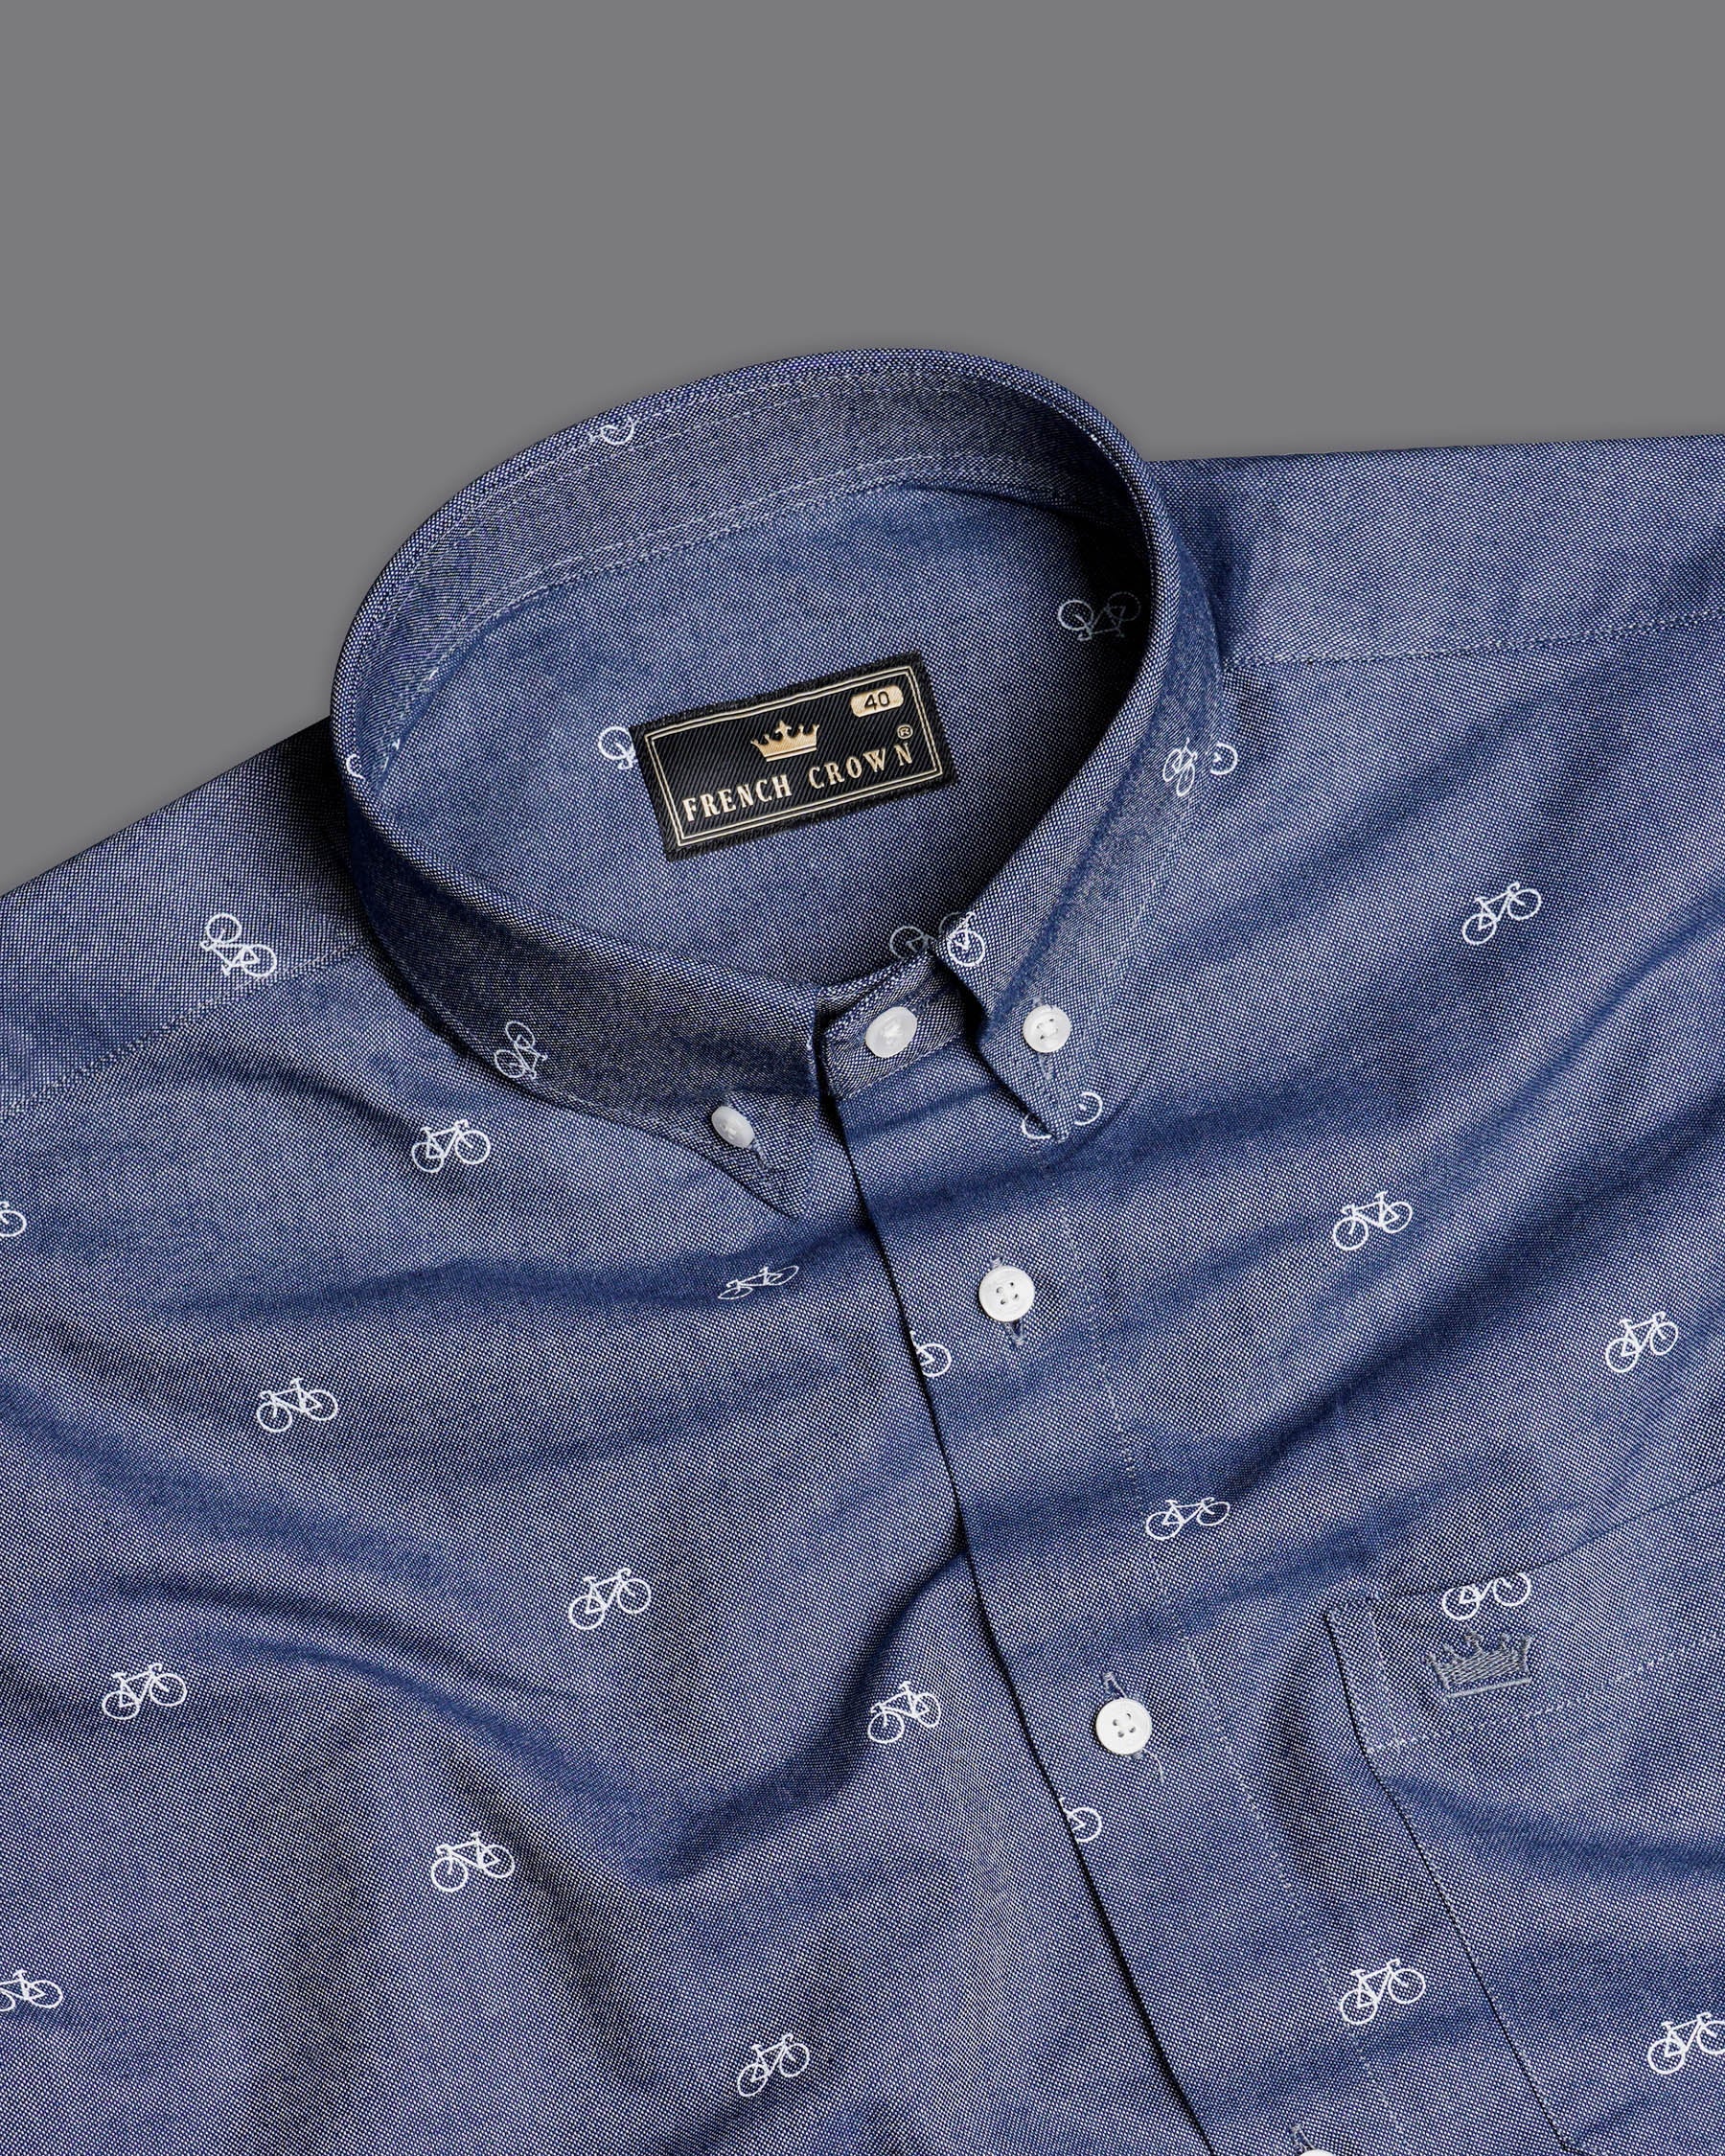 Twilight Blue Bicycle Textured Royal Oxford Shirt 9855-BD-38, 9855-BD-H-38, 9855-BD-39, 9855-BD-H-39, 9855-BD-40, 9855-BD-H-40, 9855-BD-42, 9855-BD-H-42, 9855-BD-44, 9855-BD-H-44, 9855-BD-46, 9855-BD-H-46, 9855-BD-48, 9855-BD-H-48, 9855-BD-50, 9855-BD-H-50, 9855-BD-52, 9855-BD-H-52